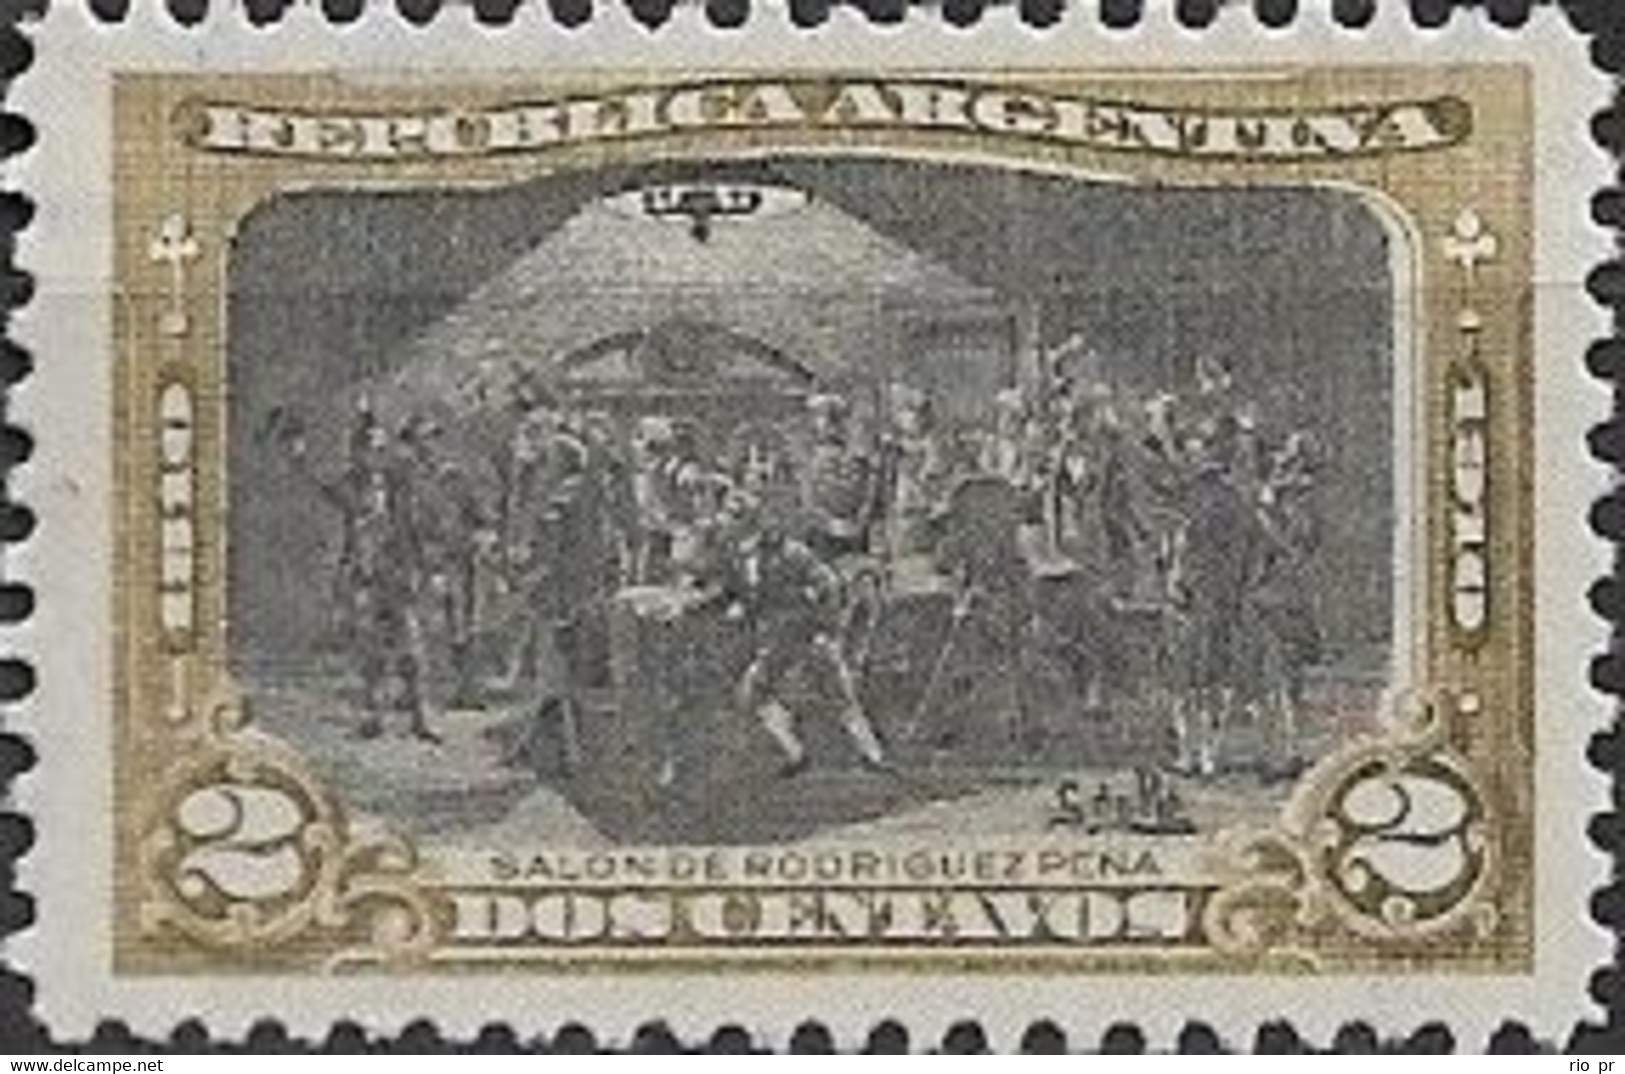 ARGENTINA - CENTENARY OF THE ARGENTINE REPUBLIC (MEETING AT PEÑA'S HOME, 2 C) 1910 - MNH - Unused Stamps